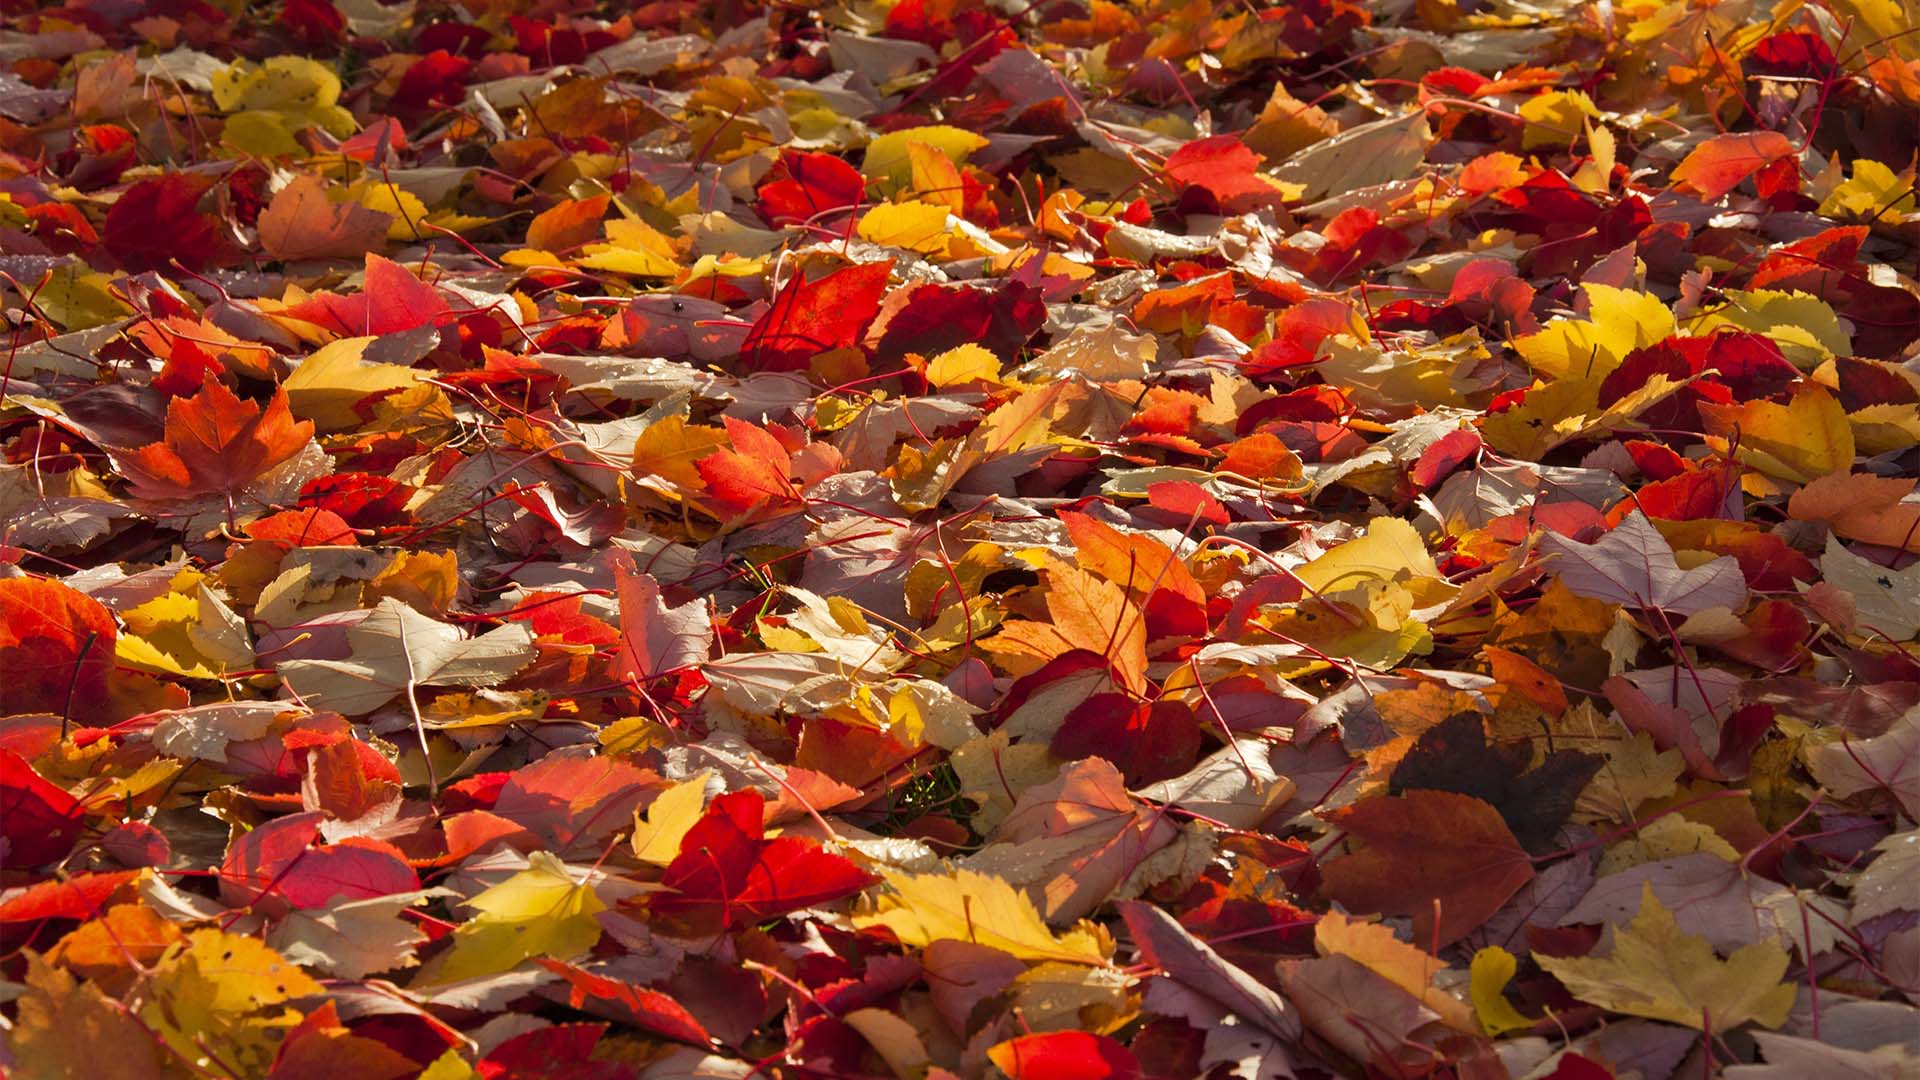 Picture of fall leaves accumulated on the ground Atlanta, Georgia